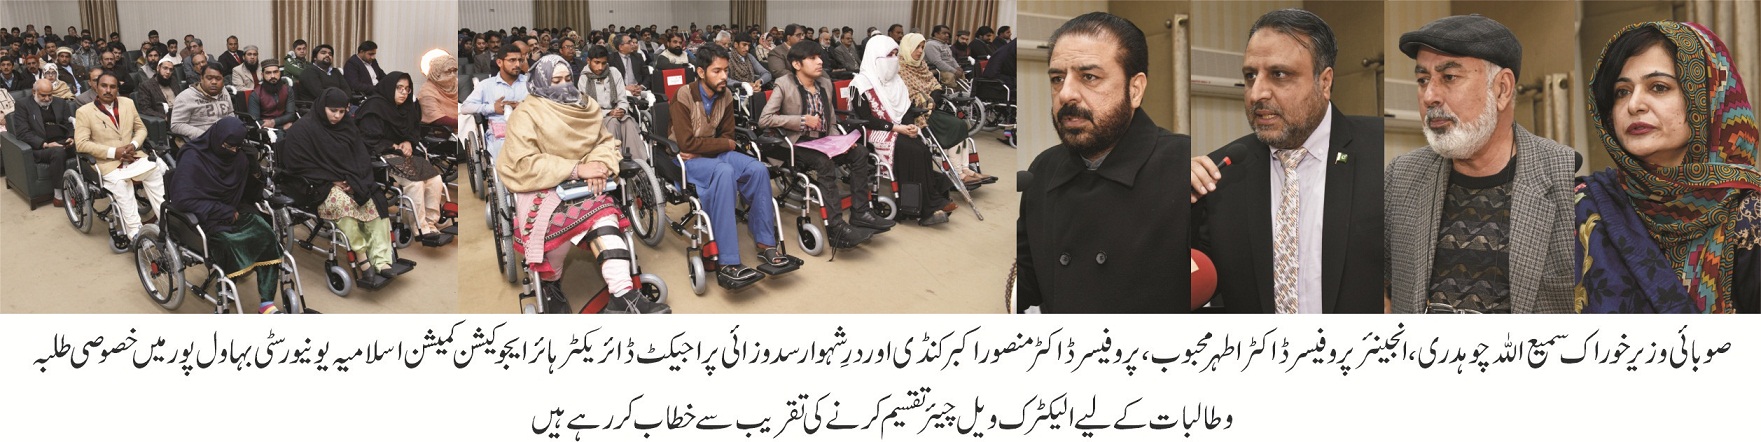 PM Eelctric Wheelchair distribution ceremony 1